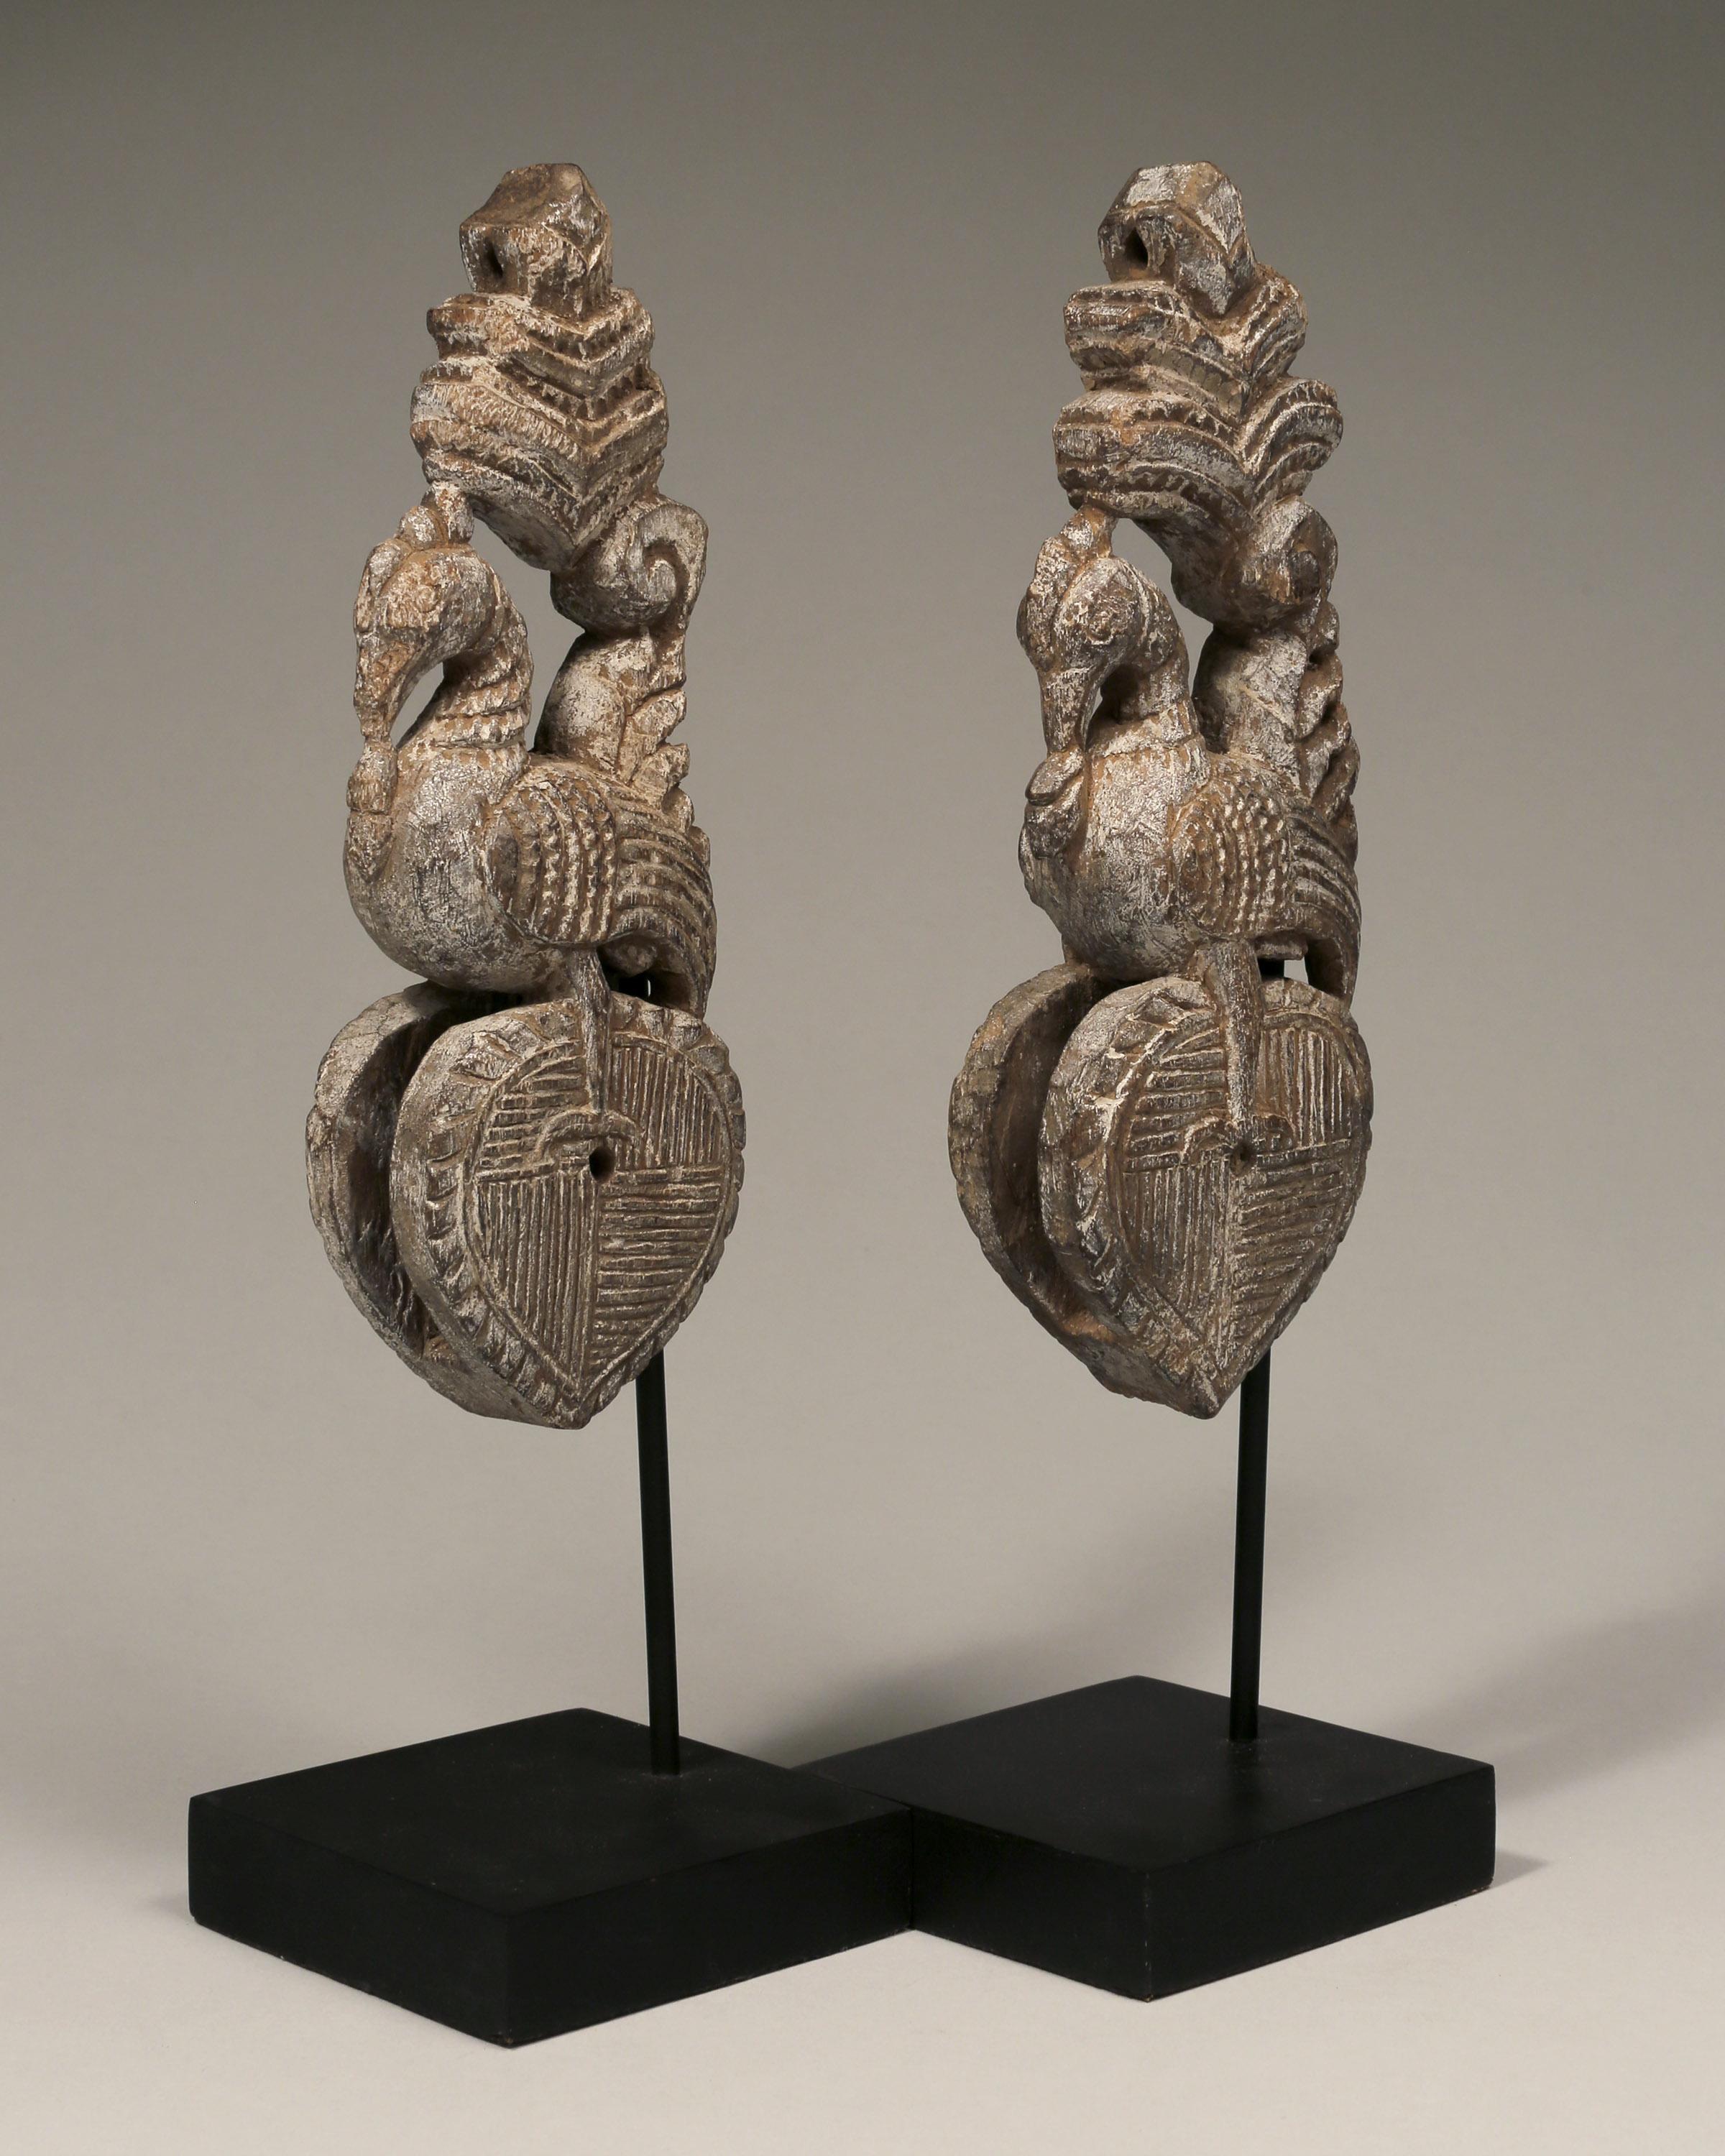 A pair of two carved wood weaving loom pulleys depicting peacocks and hearts.

Thailand,
Ca. 19th century
Wood
Measures: H 6 in x W 5 in each.